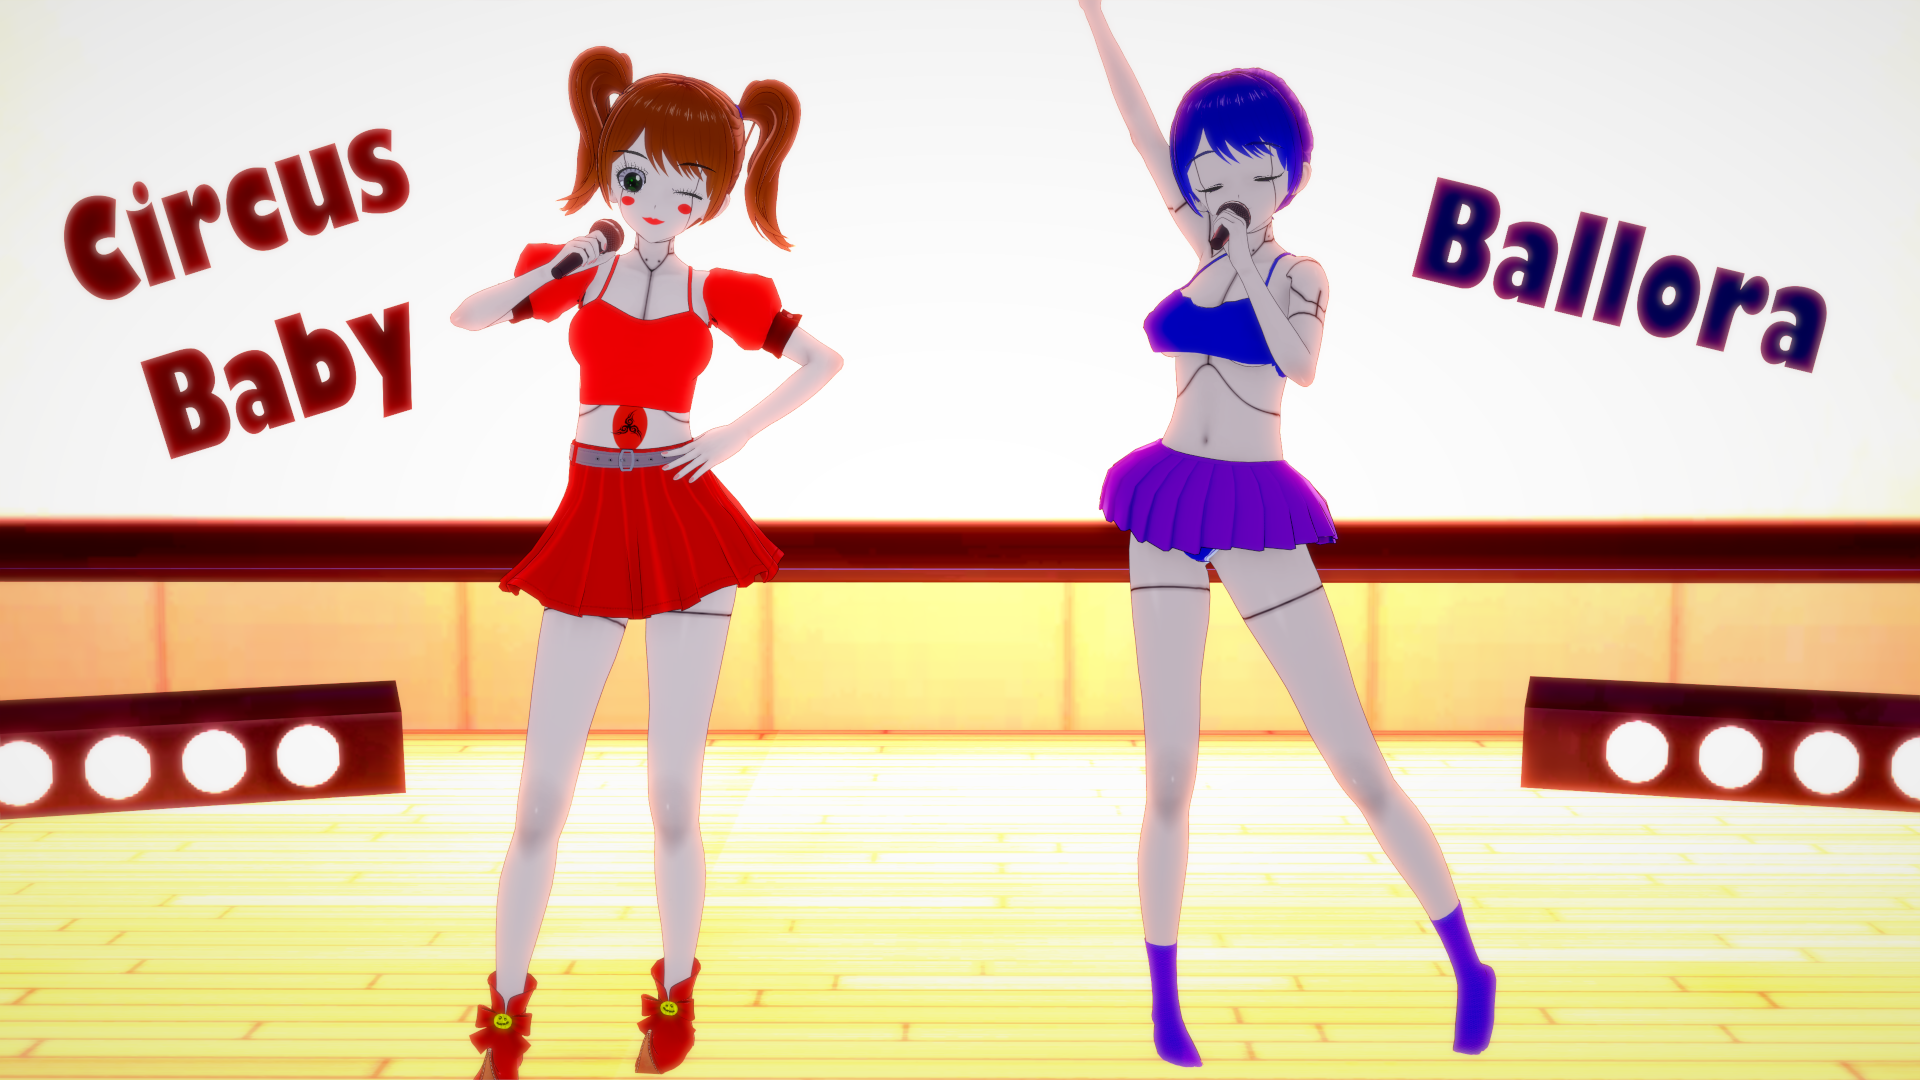 I Tried Making Circus Baby And Ballora To The Best Of My Abilities Using Only Unmodded In Game Assets In Koikatsu Party. What Do You Think?